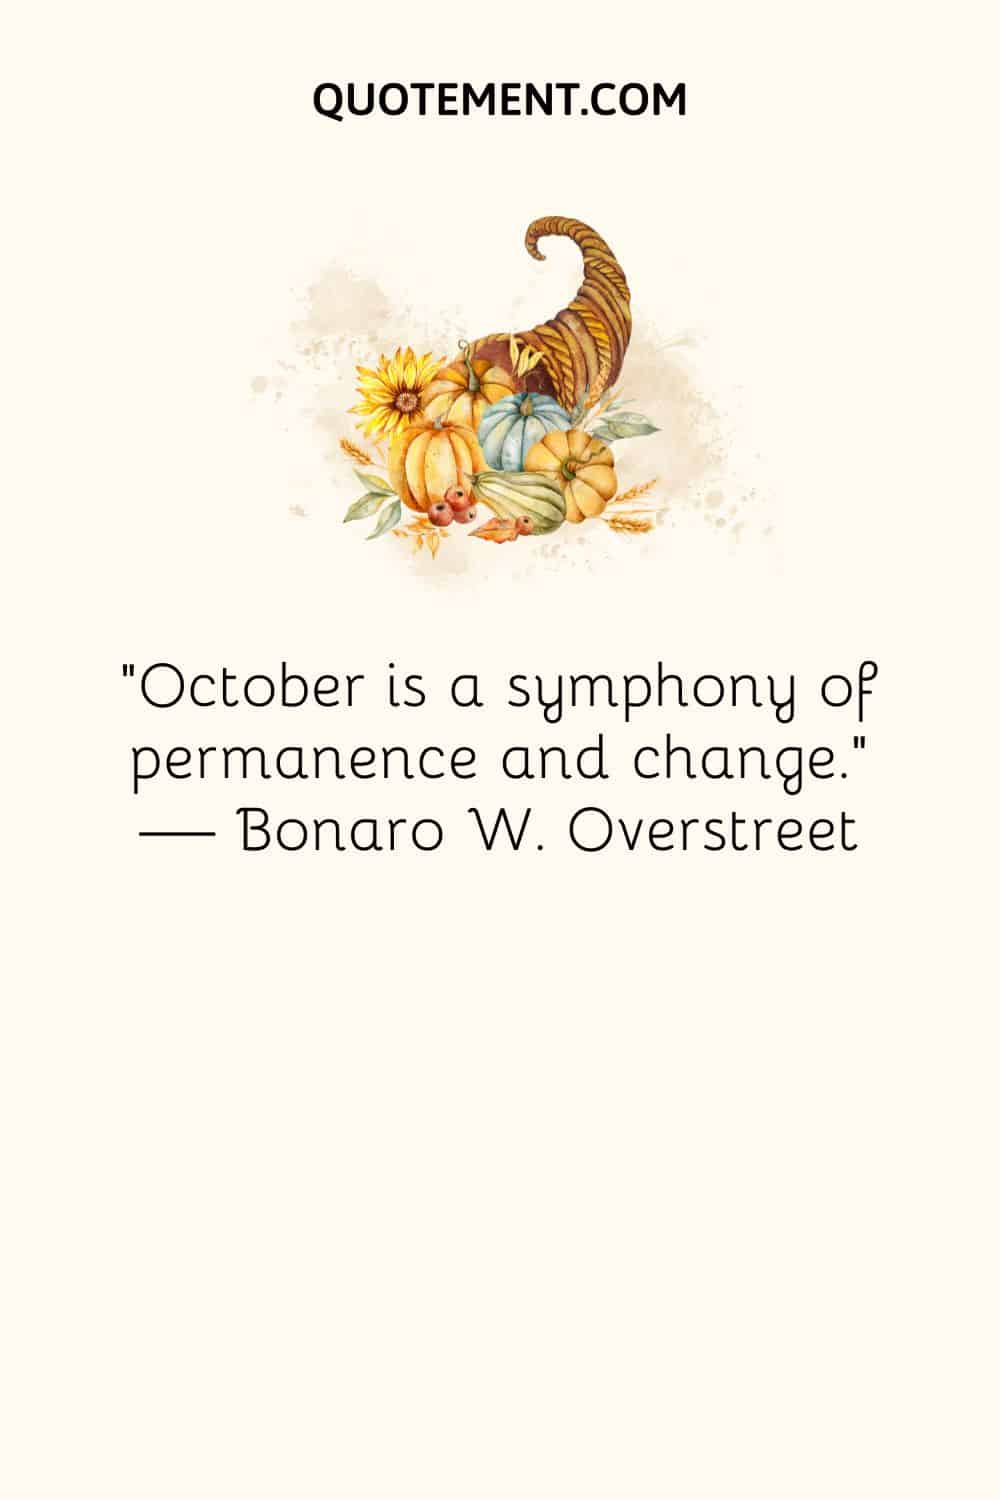 October is a symphony of permanence and change